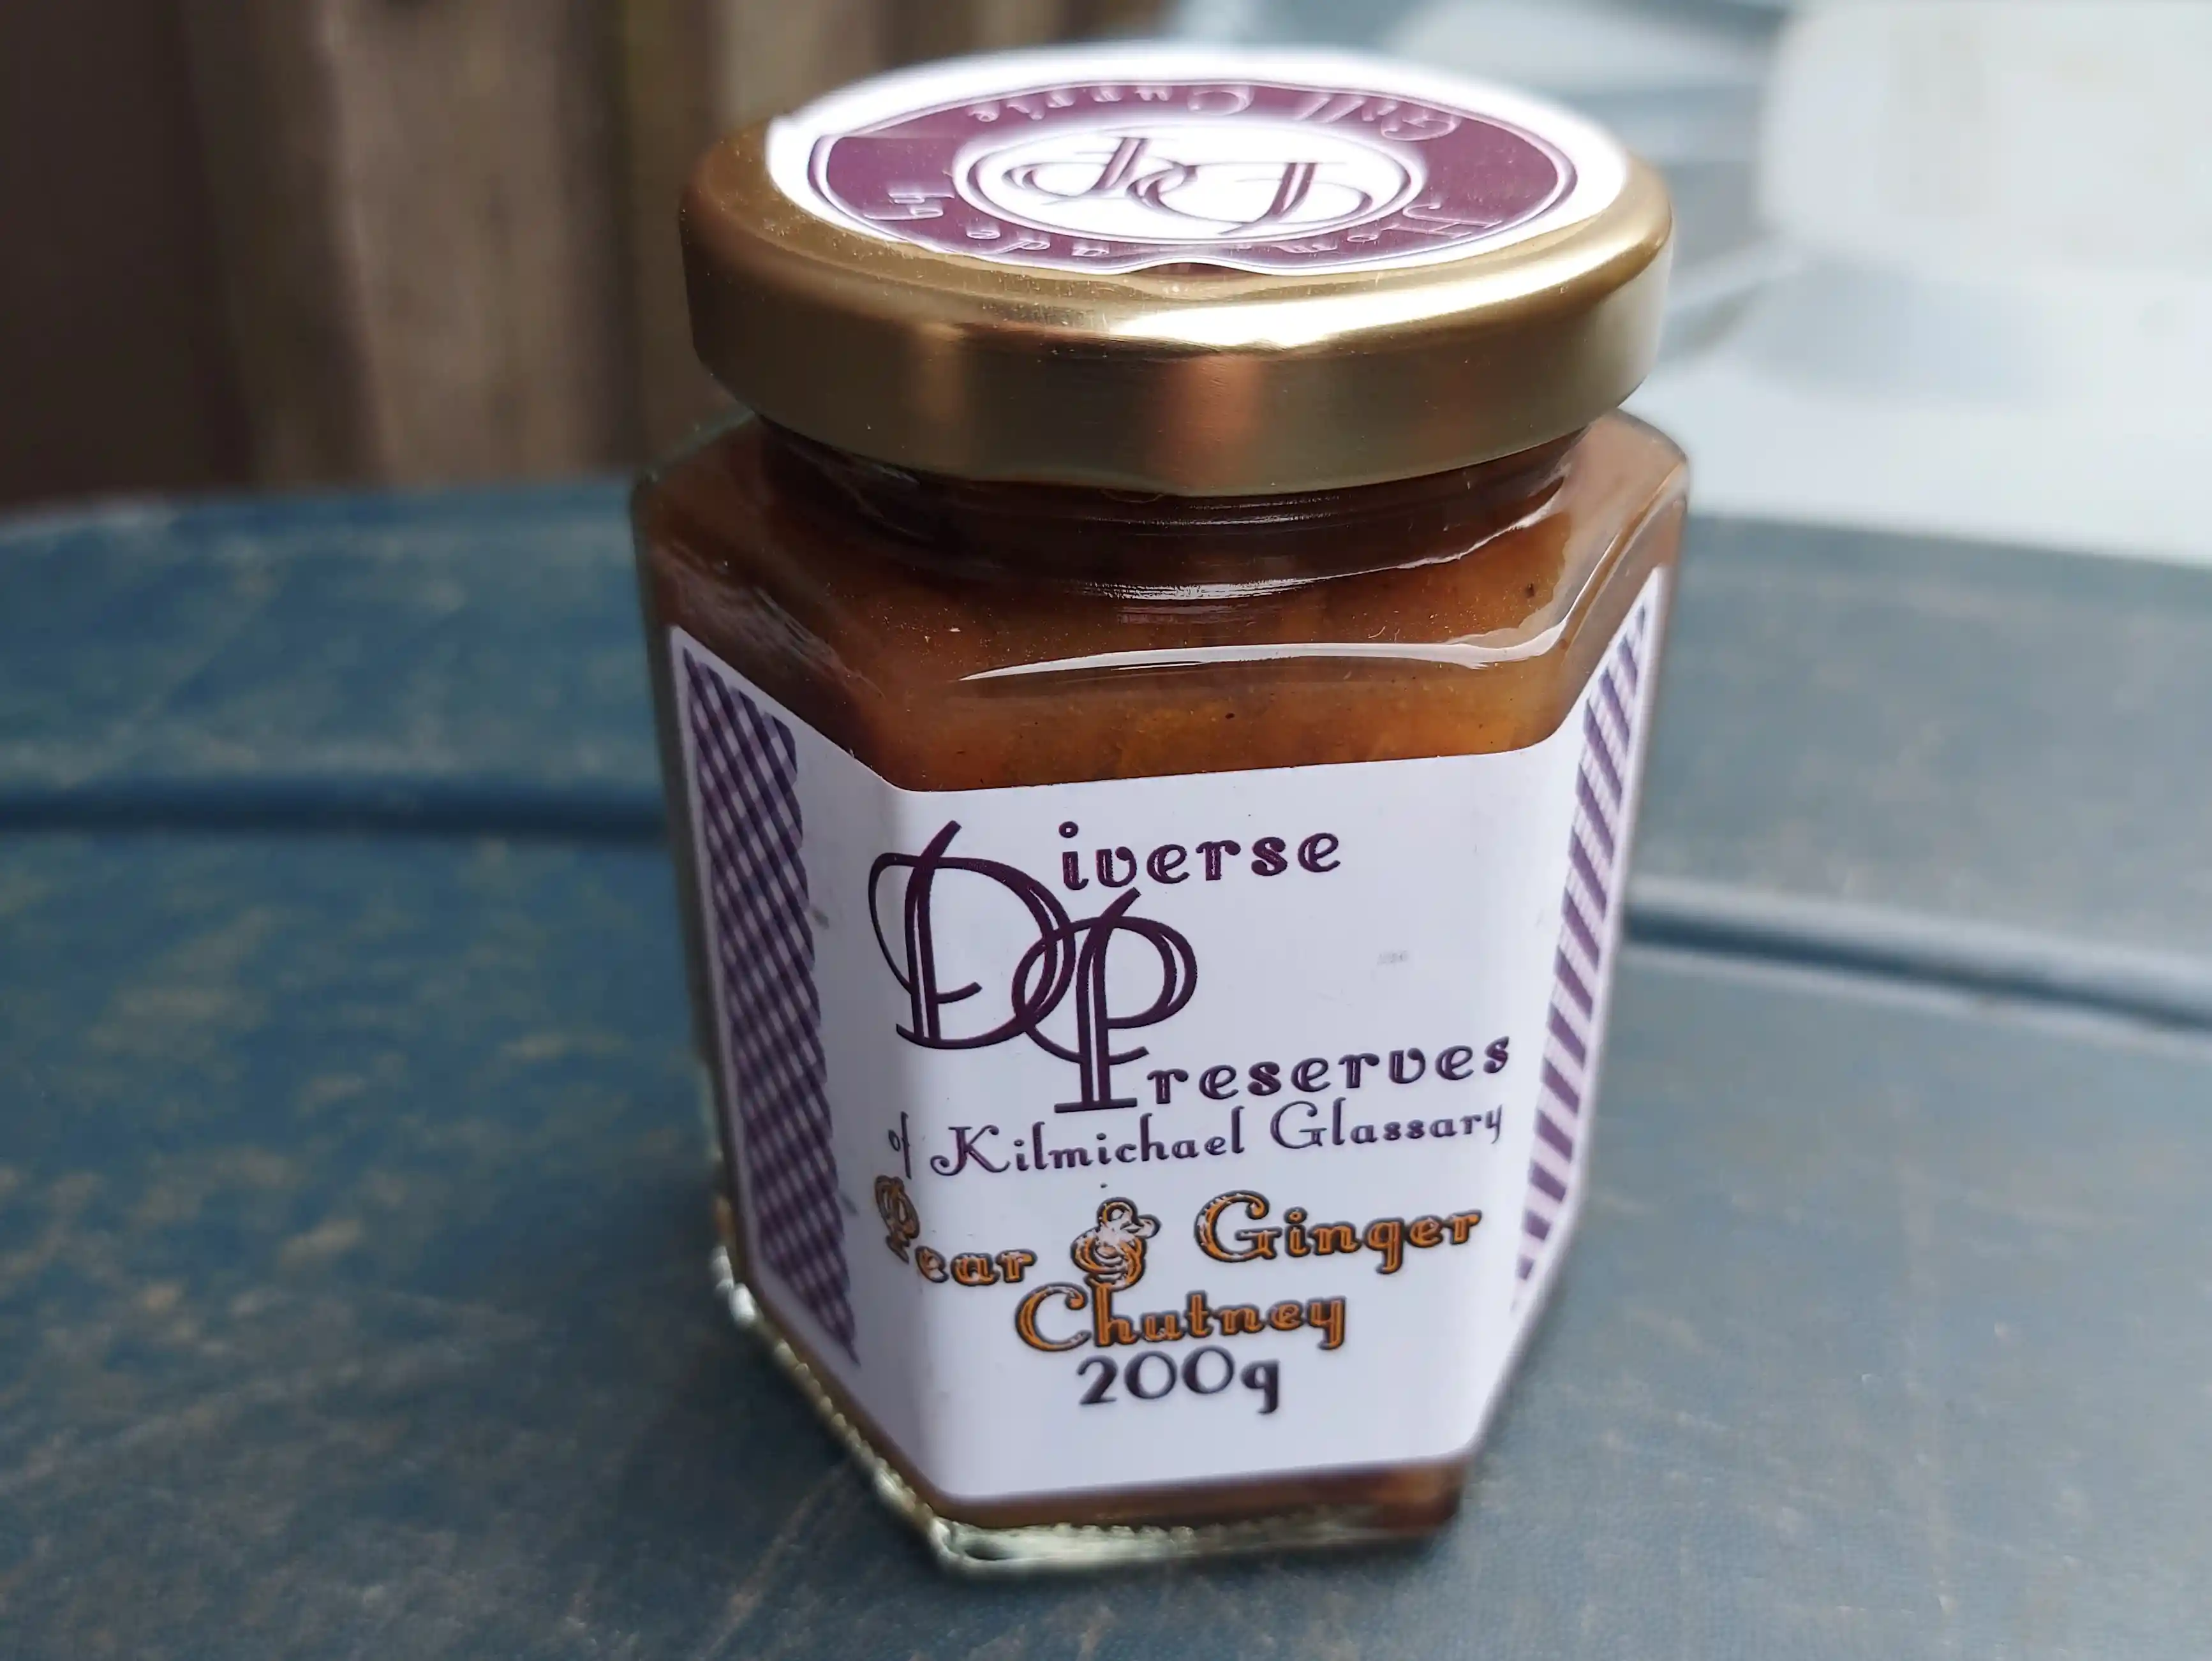 A pear and ginger chutney